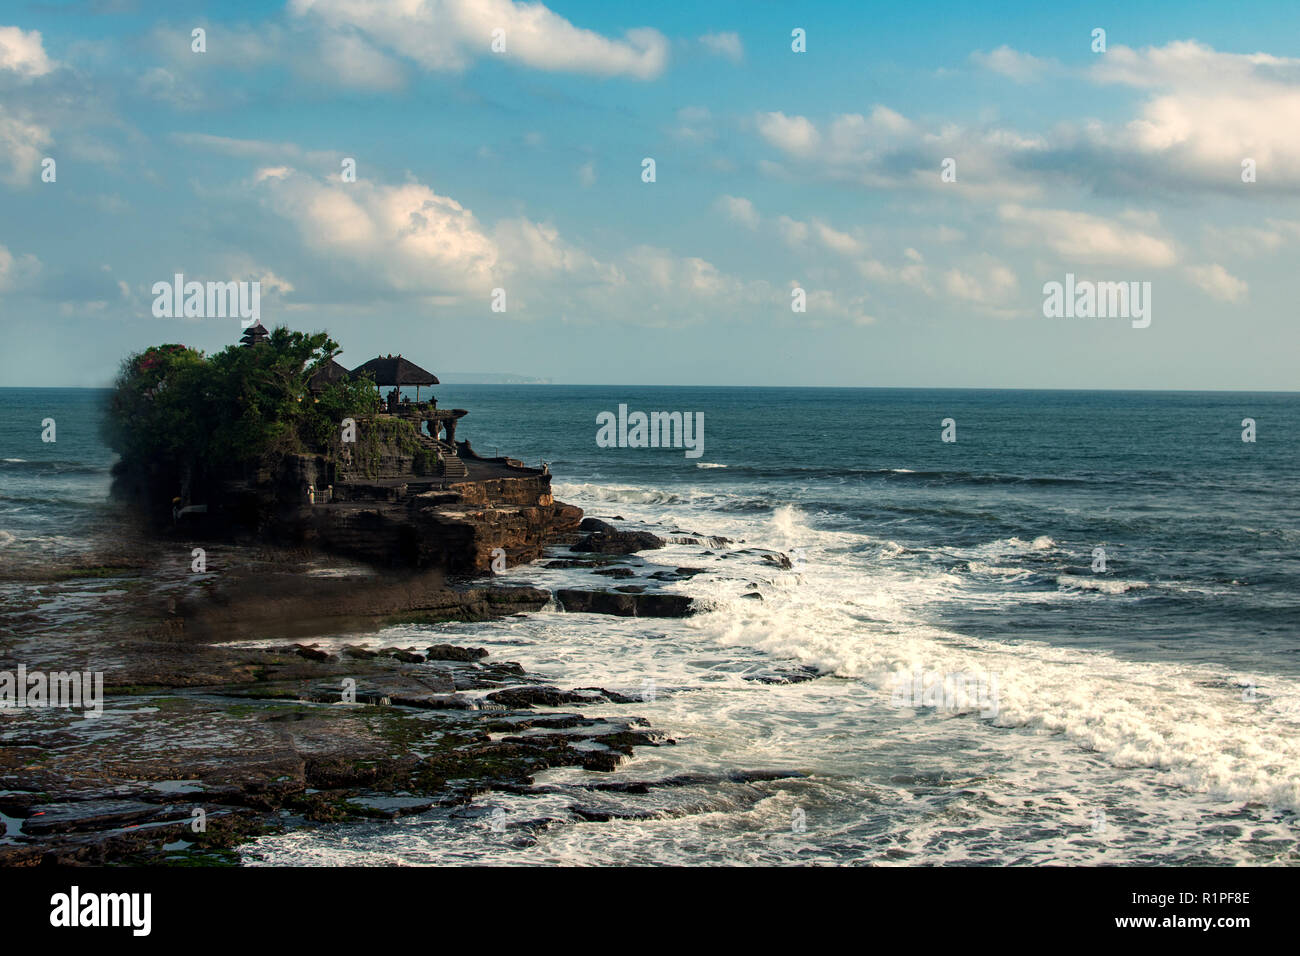 Chimeric temple on the water. Water temple in Bali. Indonesia nature landscape. Famous Bali landmark. Splashing waves and stone. Cloudy day in Indonesia. Water and rocks before storm Stock Photo